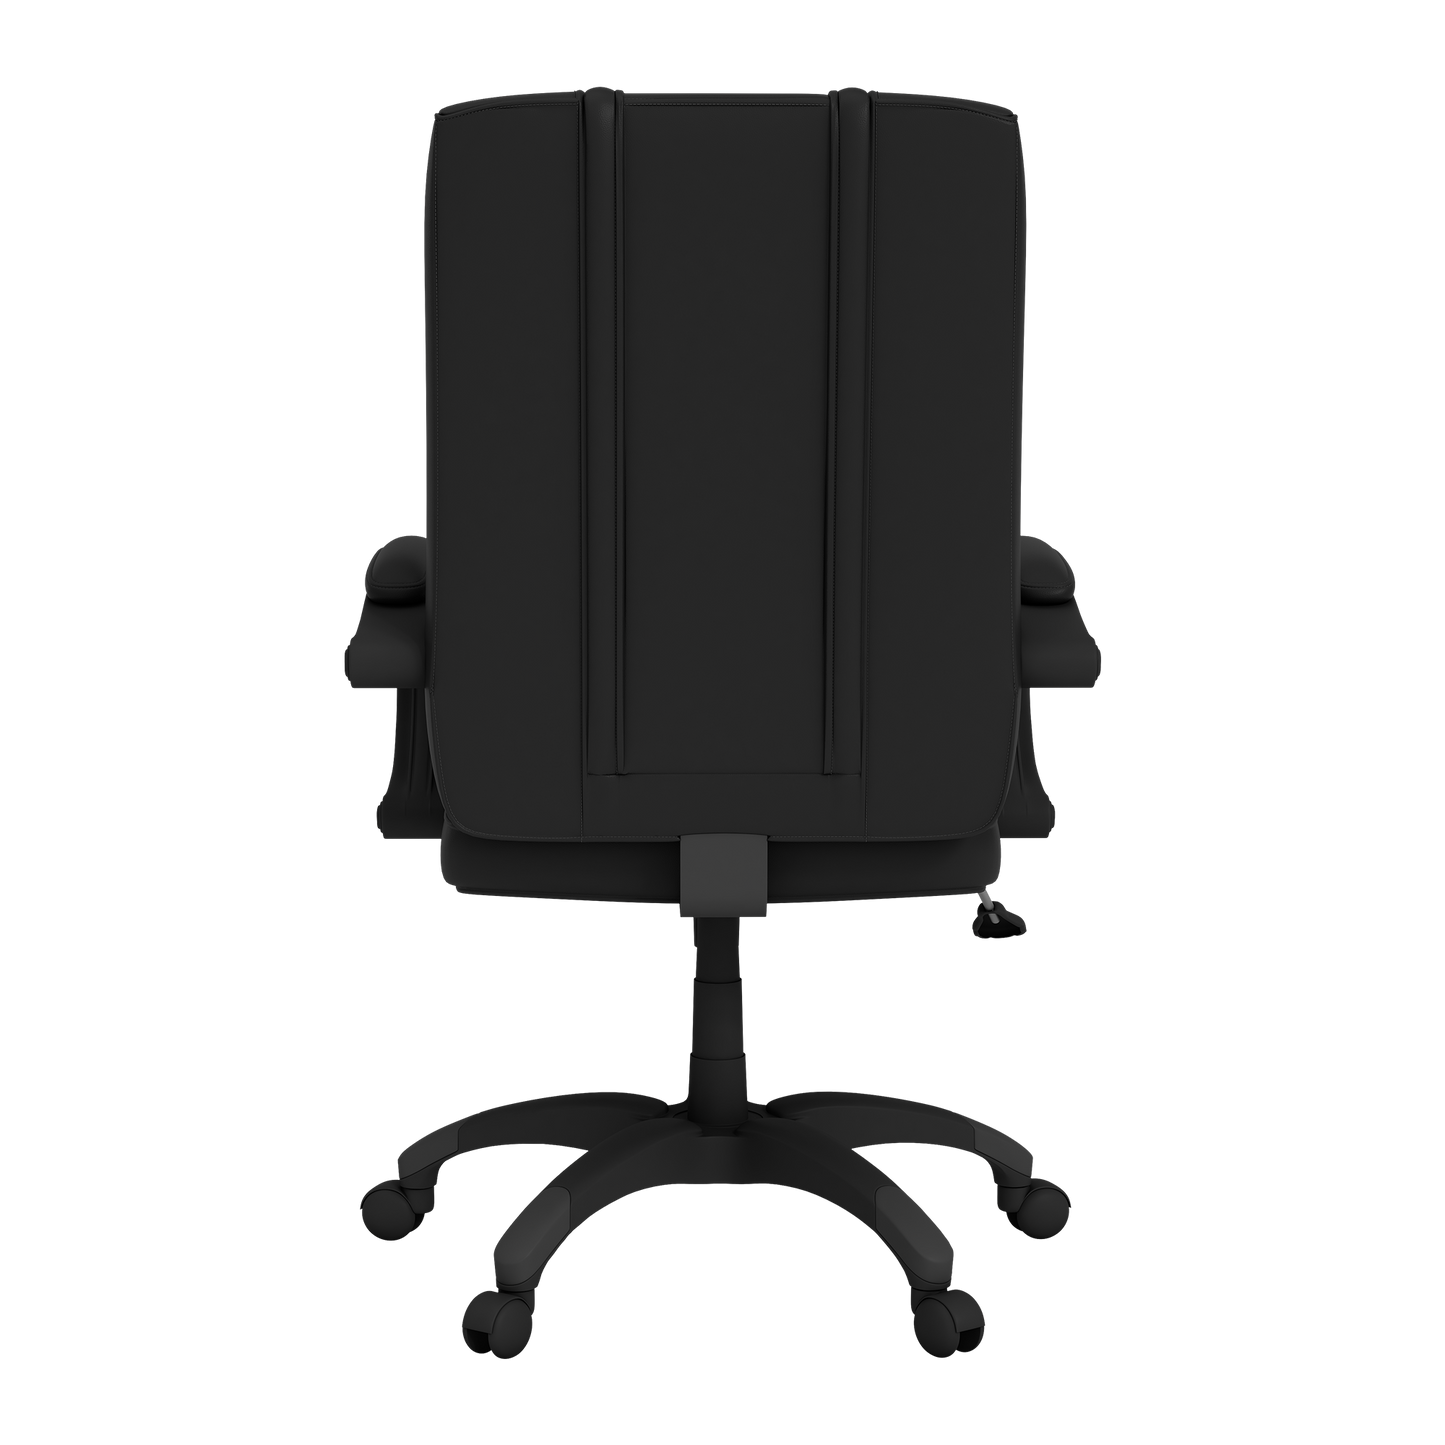 Office Chair 1000 with Chicago Bulls Logo